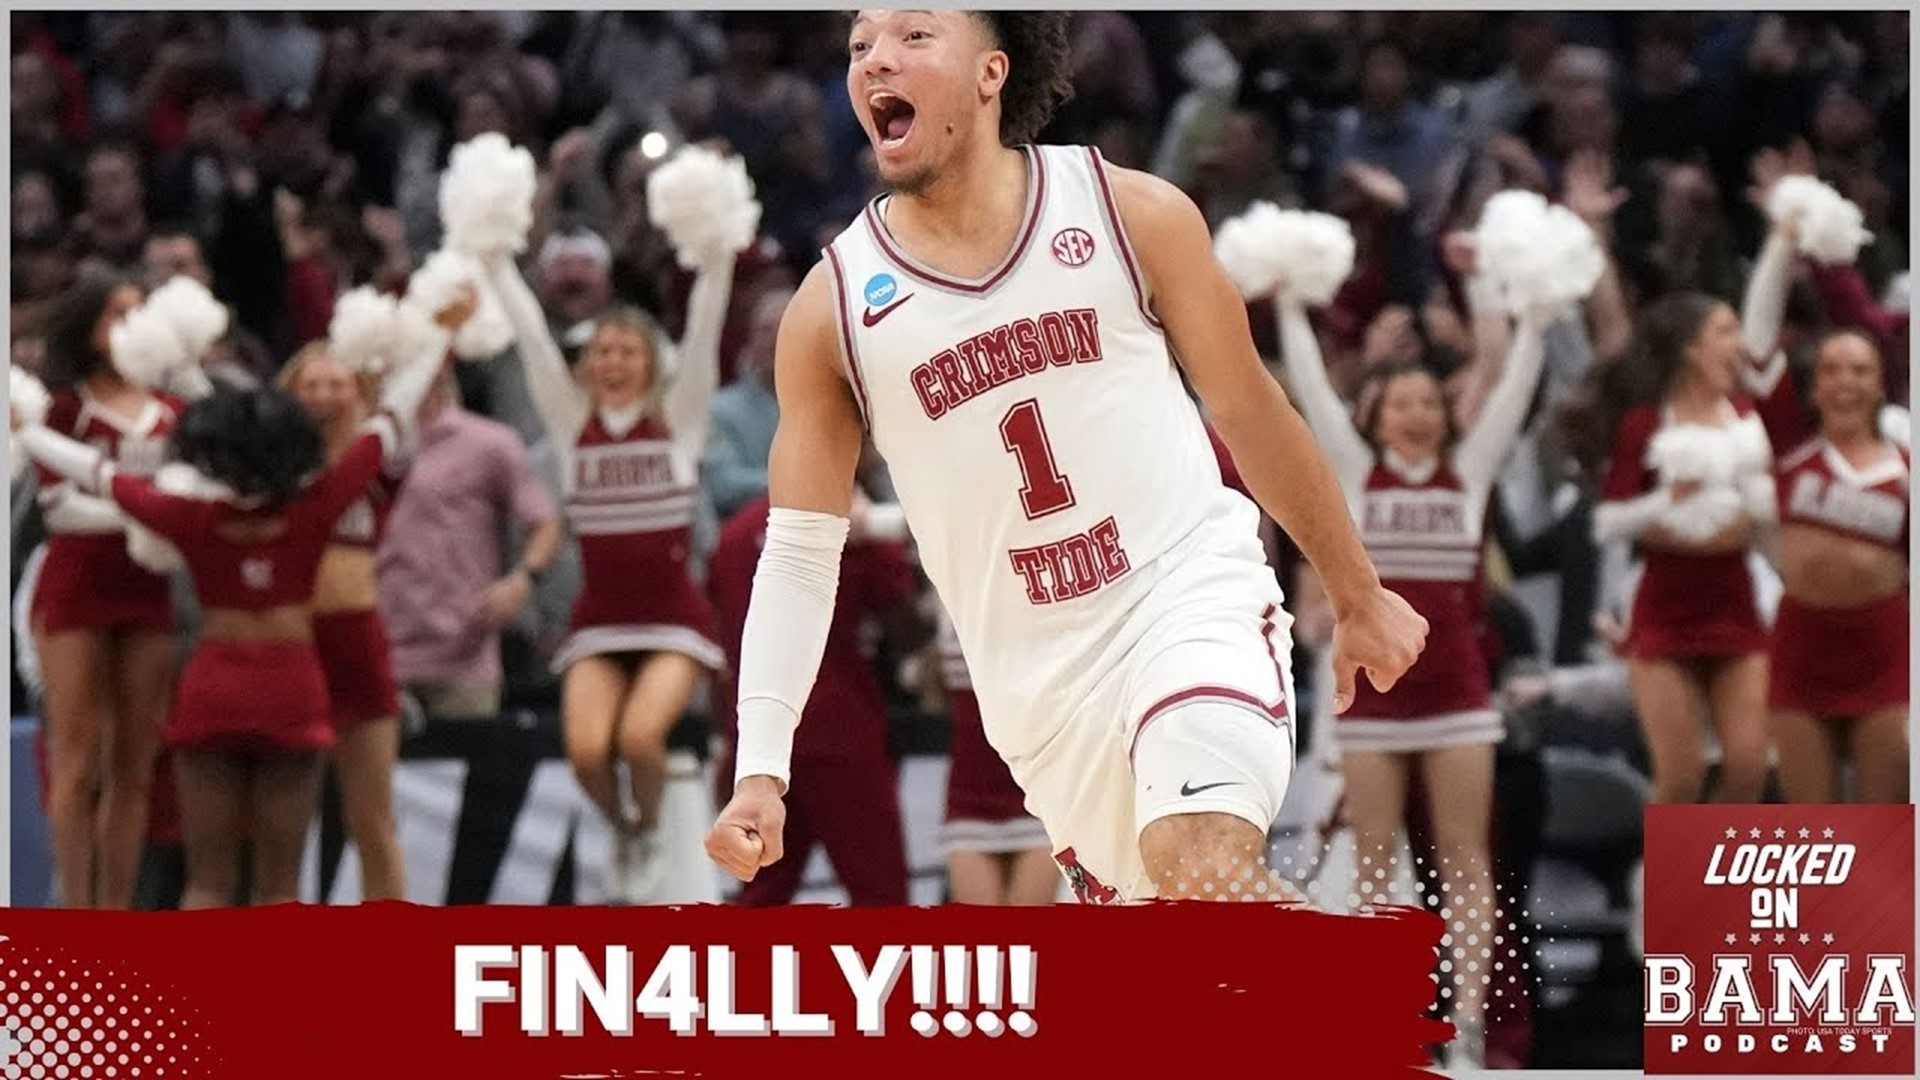 It too a long time, but Alabama men's basketball is headed to the Final Four!